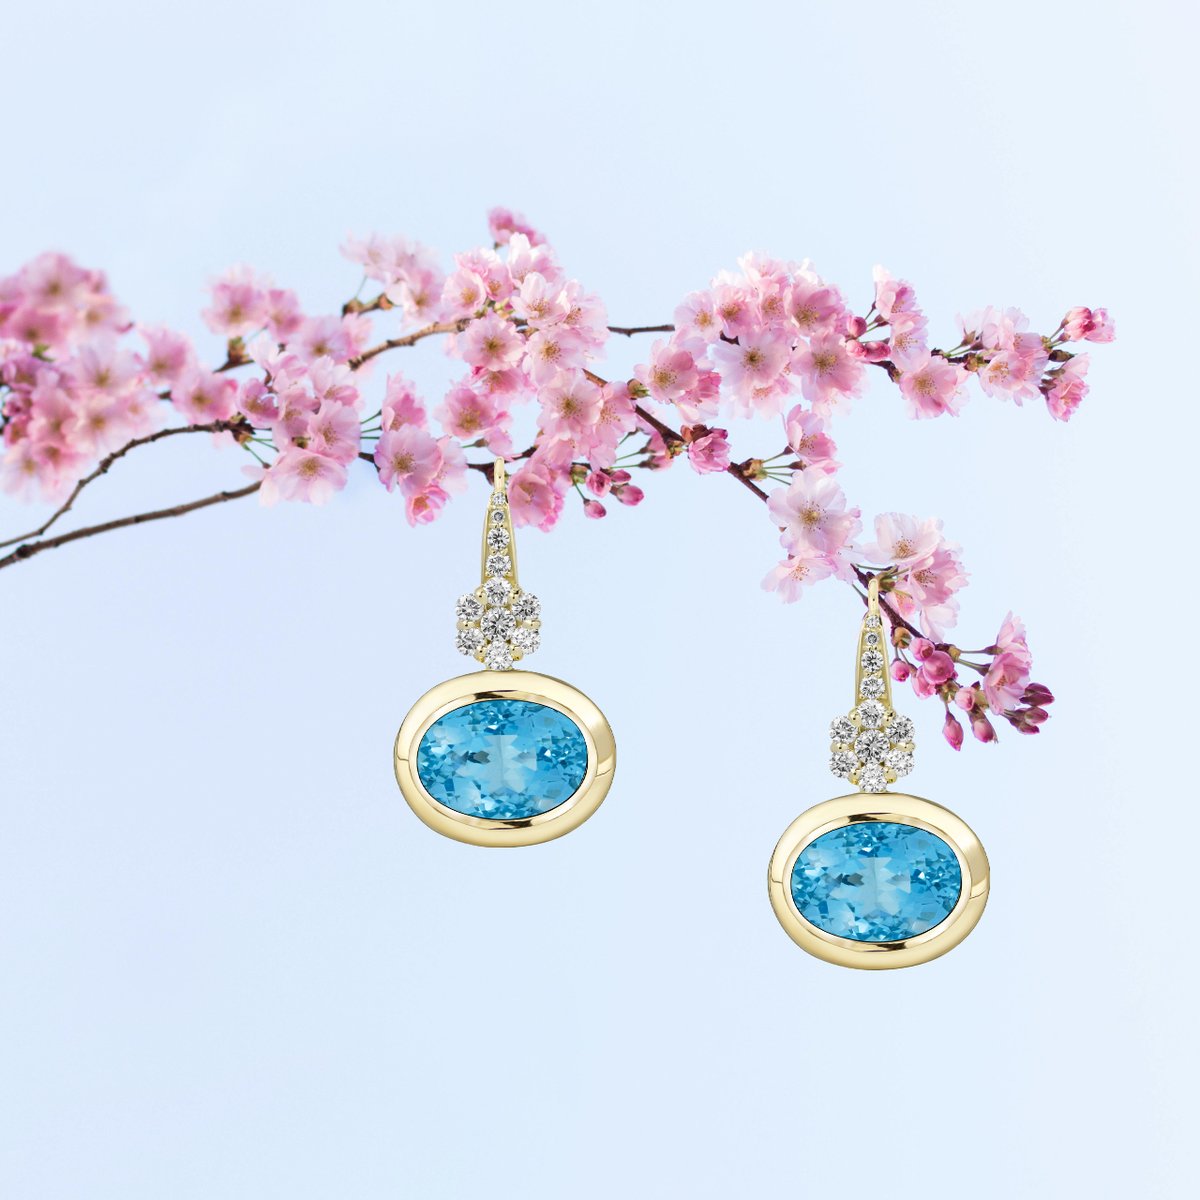 Looking for a touch of glamour? These Blue Topaz And Diamond Earrings have got you covered!
.
.
.
.
.
#singhvijewels #carvedstone #18kgold #gemstonejewelry #elegantstyle #luxuryaccessories #finejewelry #bluetopazgems #uniquedesigns #handcraftedbeauty